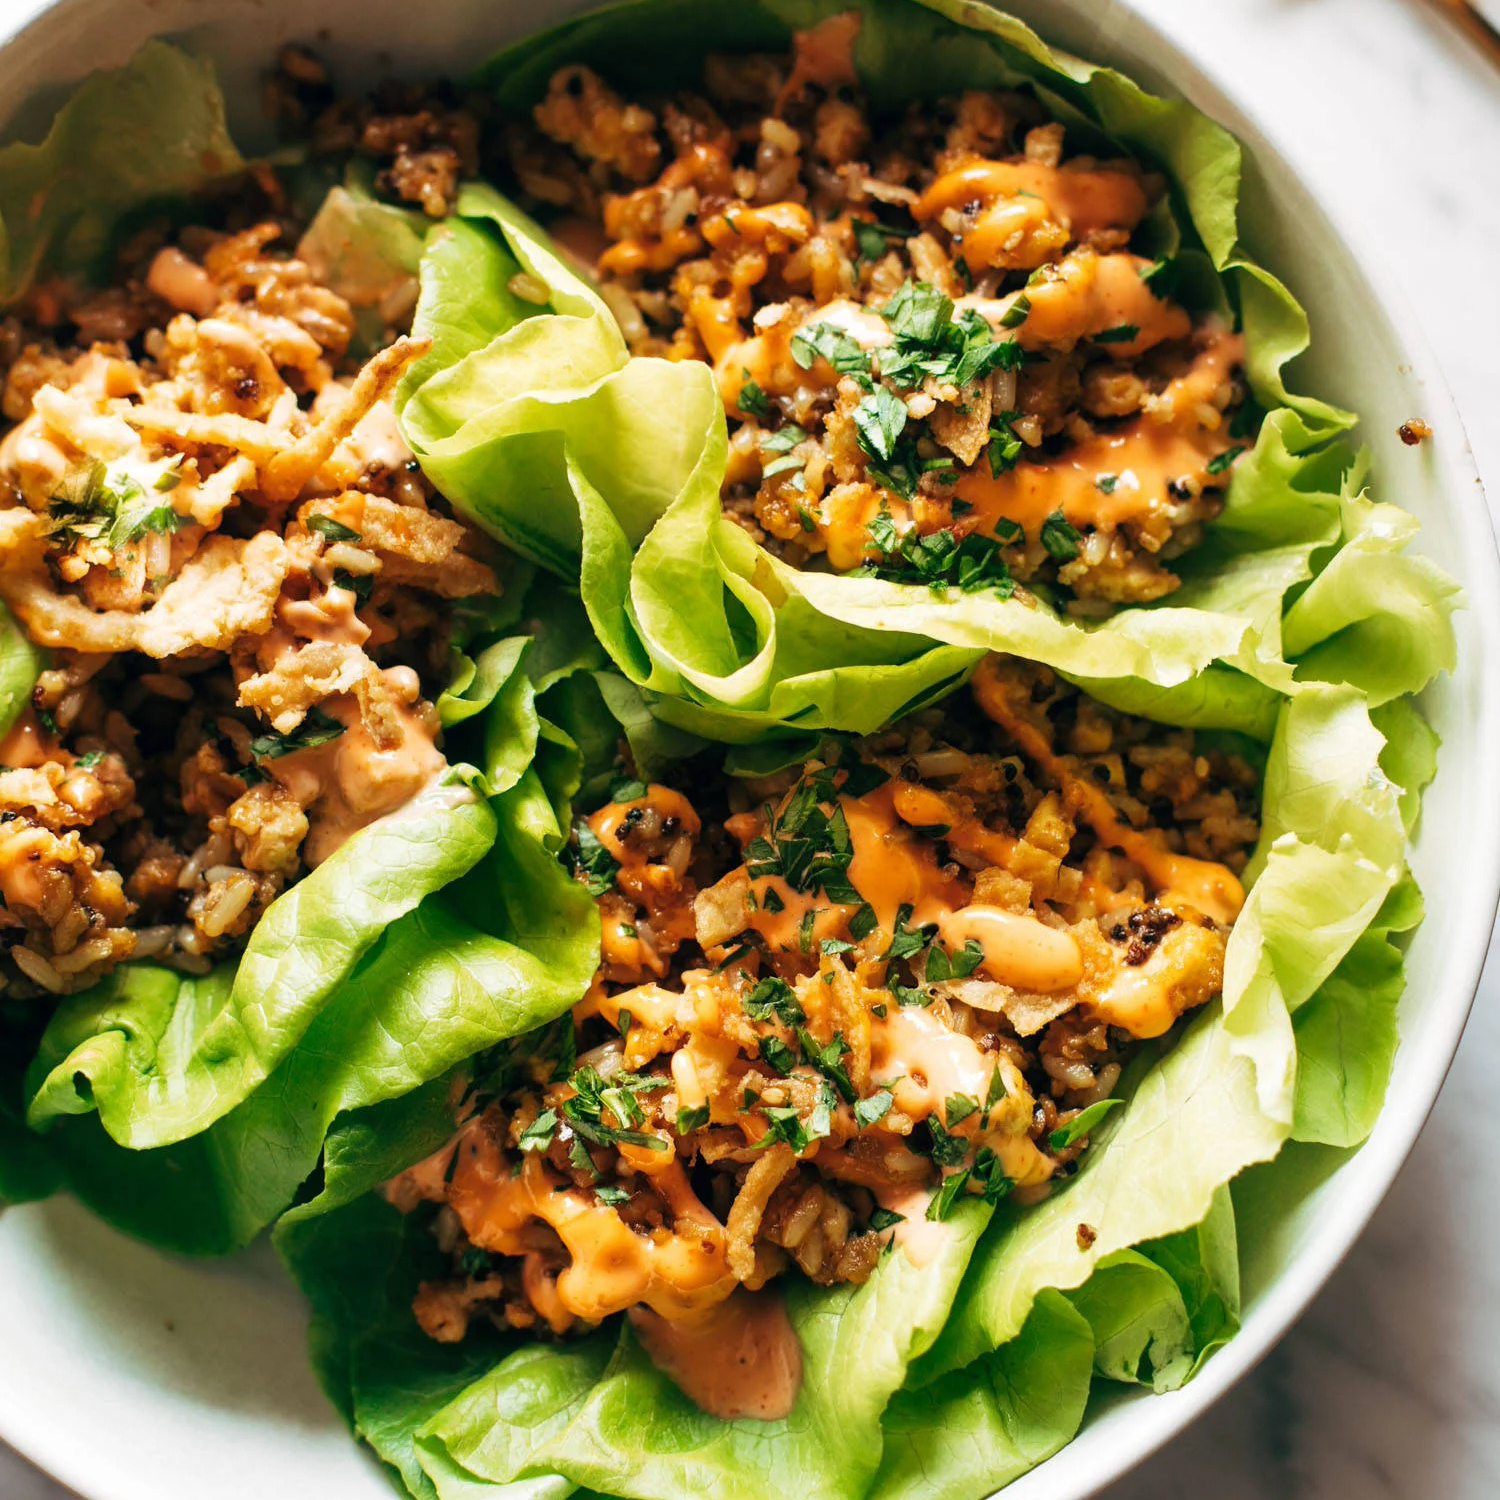 Lettuce wraps filled with brown rice and tofu.